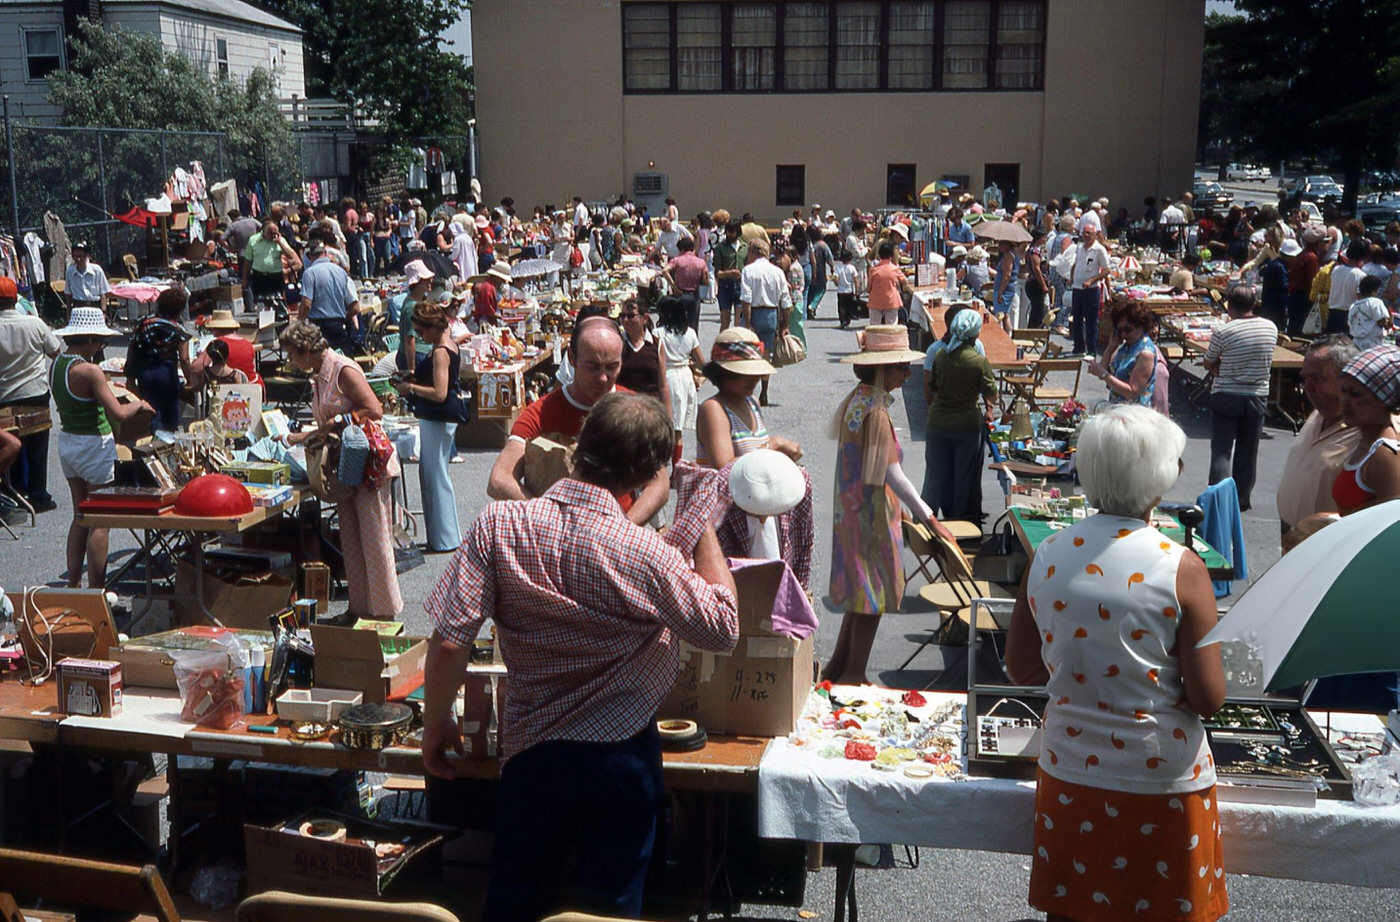 Vendors And Customers At An Outdoor Flea Market On Woodhaven Boulevard In Rego Park, Queens, 1970S.